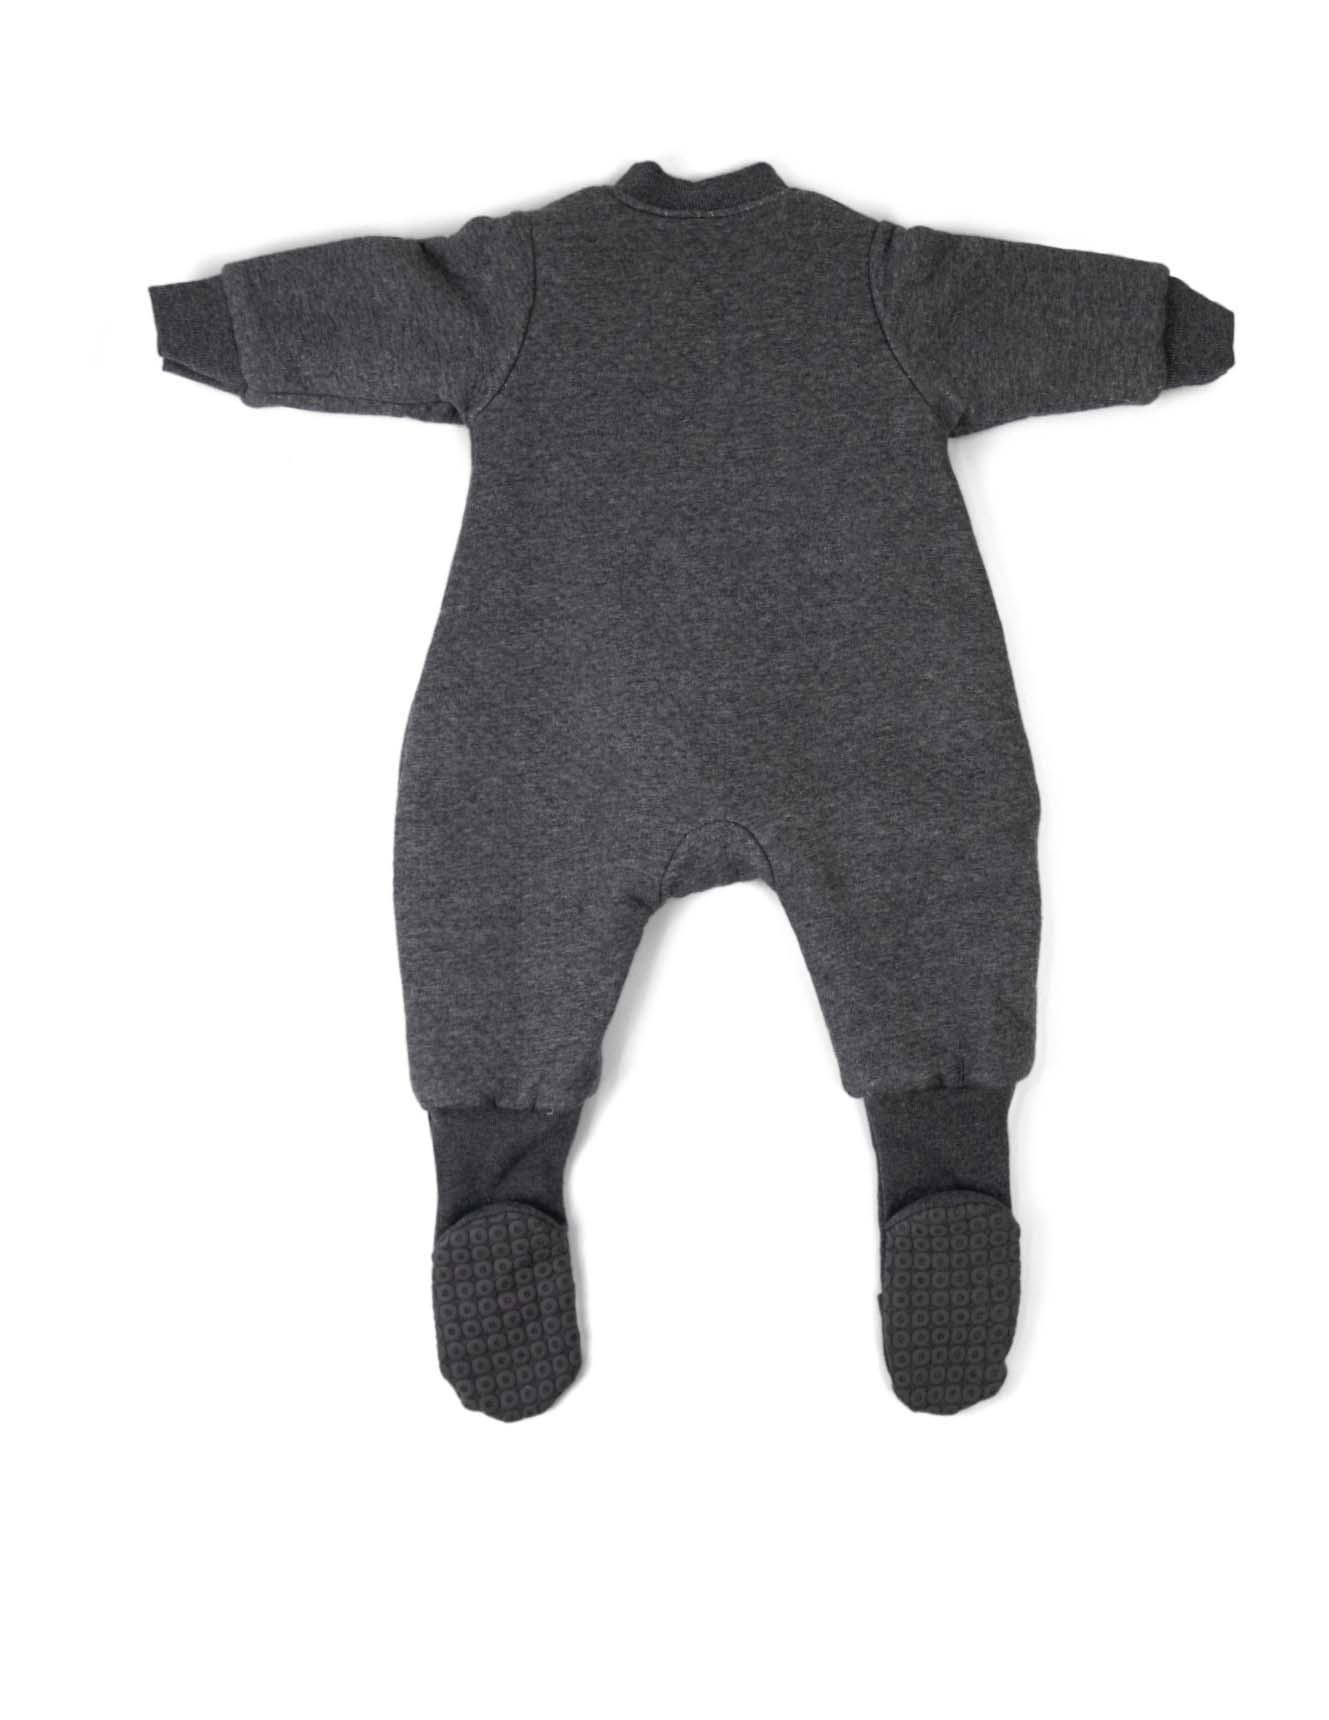 warmies with arms and legs cotton 3.0 tog - charcoal/hugs equals love